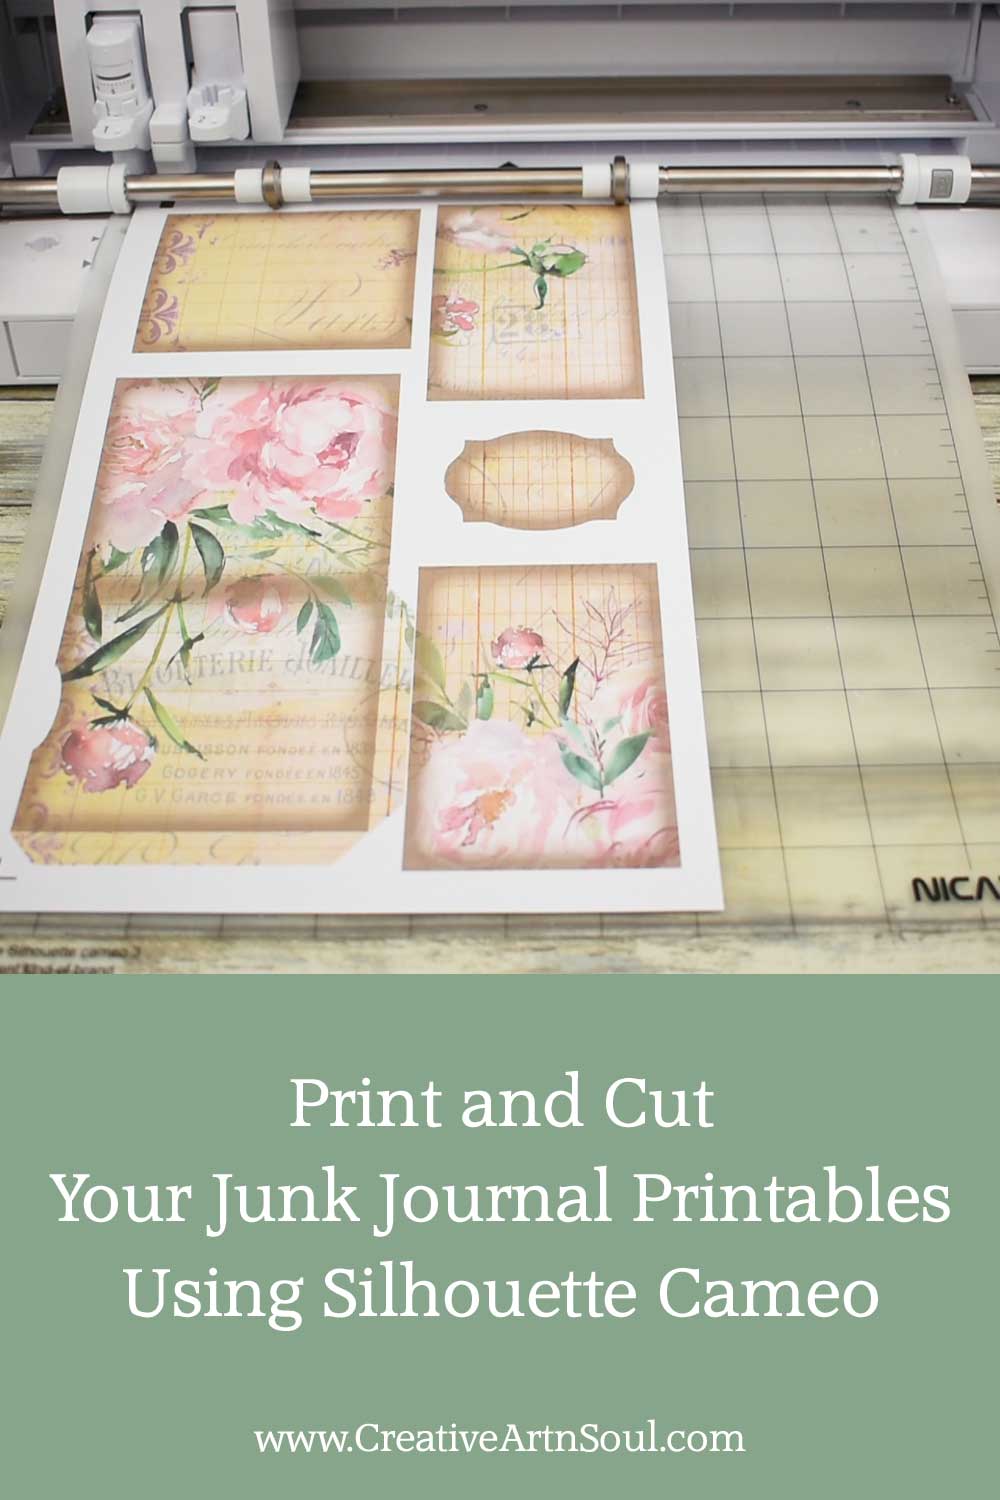 How to Print and Cut Junk Journal Printables Using Silhouette Cameo